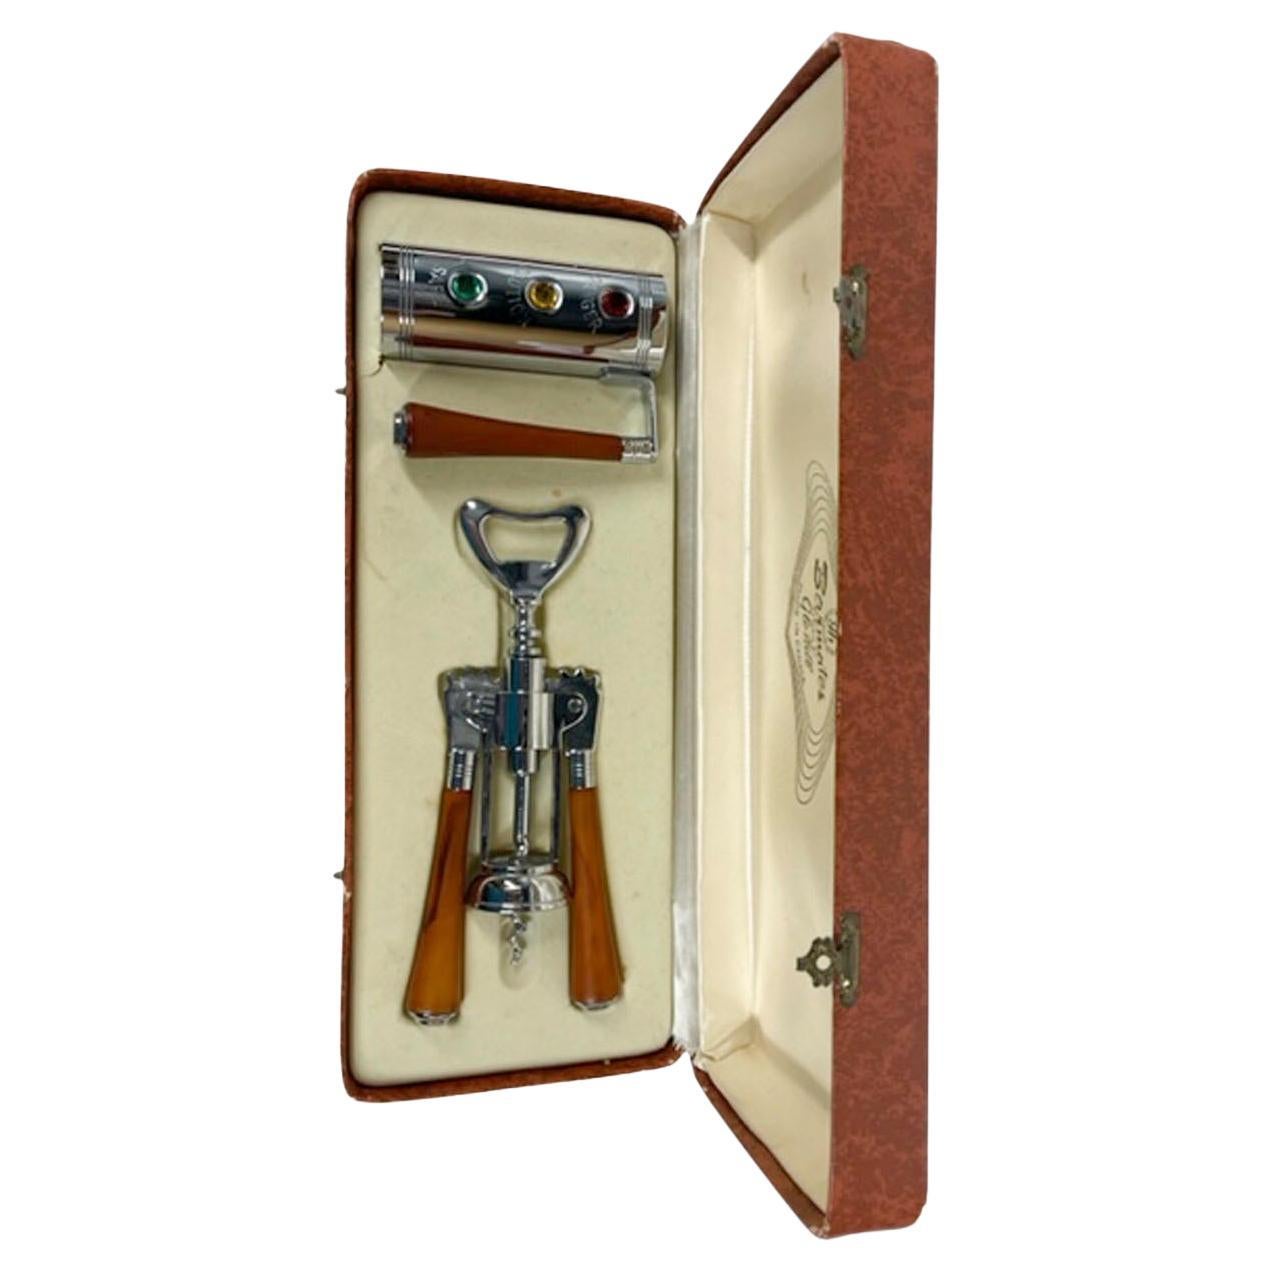 Vintage boxed 2-piece bar tool set, from Glo-Hills Barmates line. The set includes a jack-form chrome corkscrew with butterscotch Bakelite handles and a bottle opener top along with a handled jigger of cylindrical form and designed as a traffic